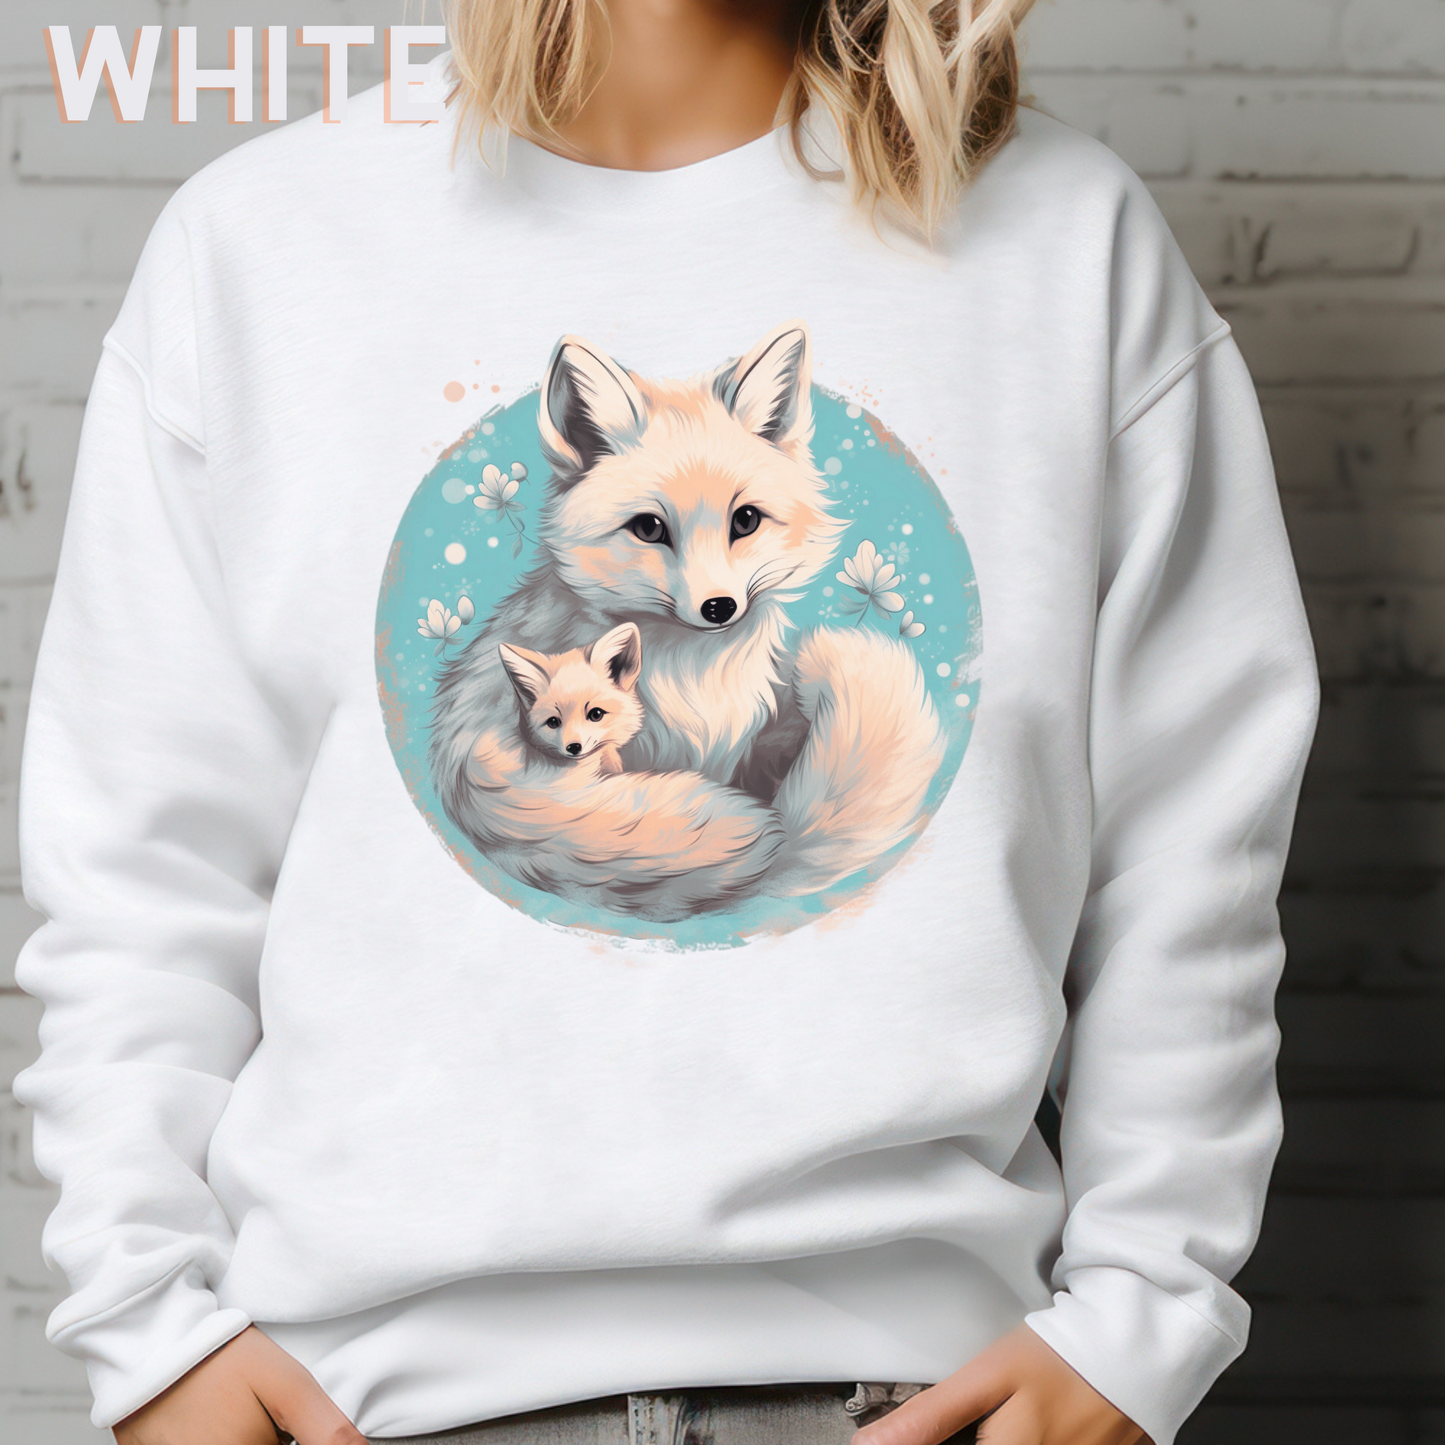 Vintage Forest Witch Aesthetic Sweatshirt - Cozy Fox Cottagecore Sweater with Mommy and Baby Fox Design Sweatshirt   